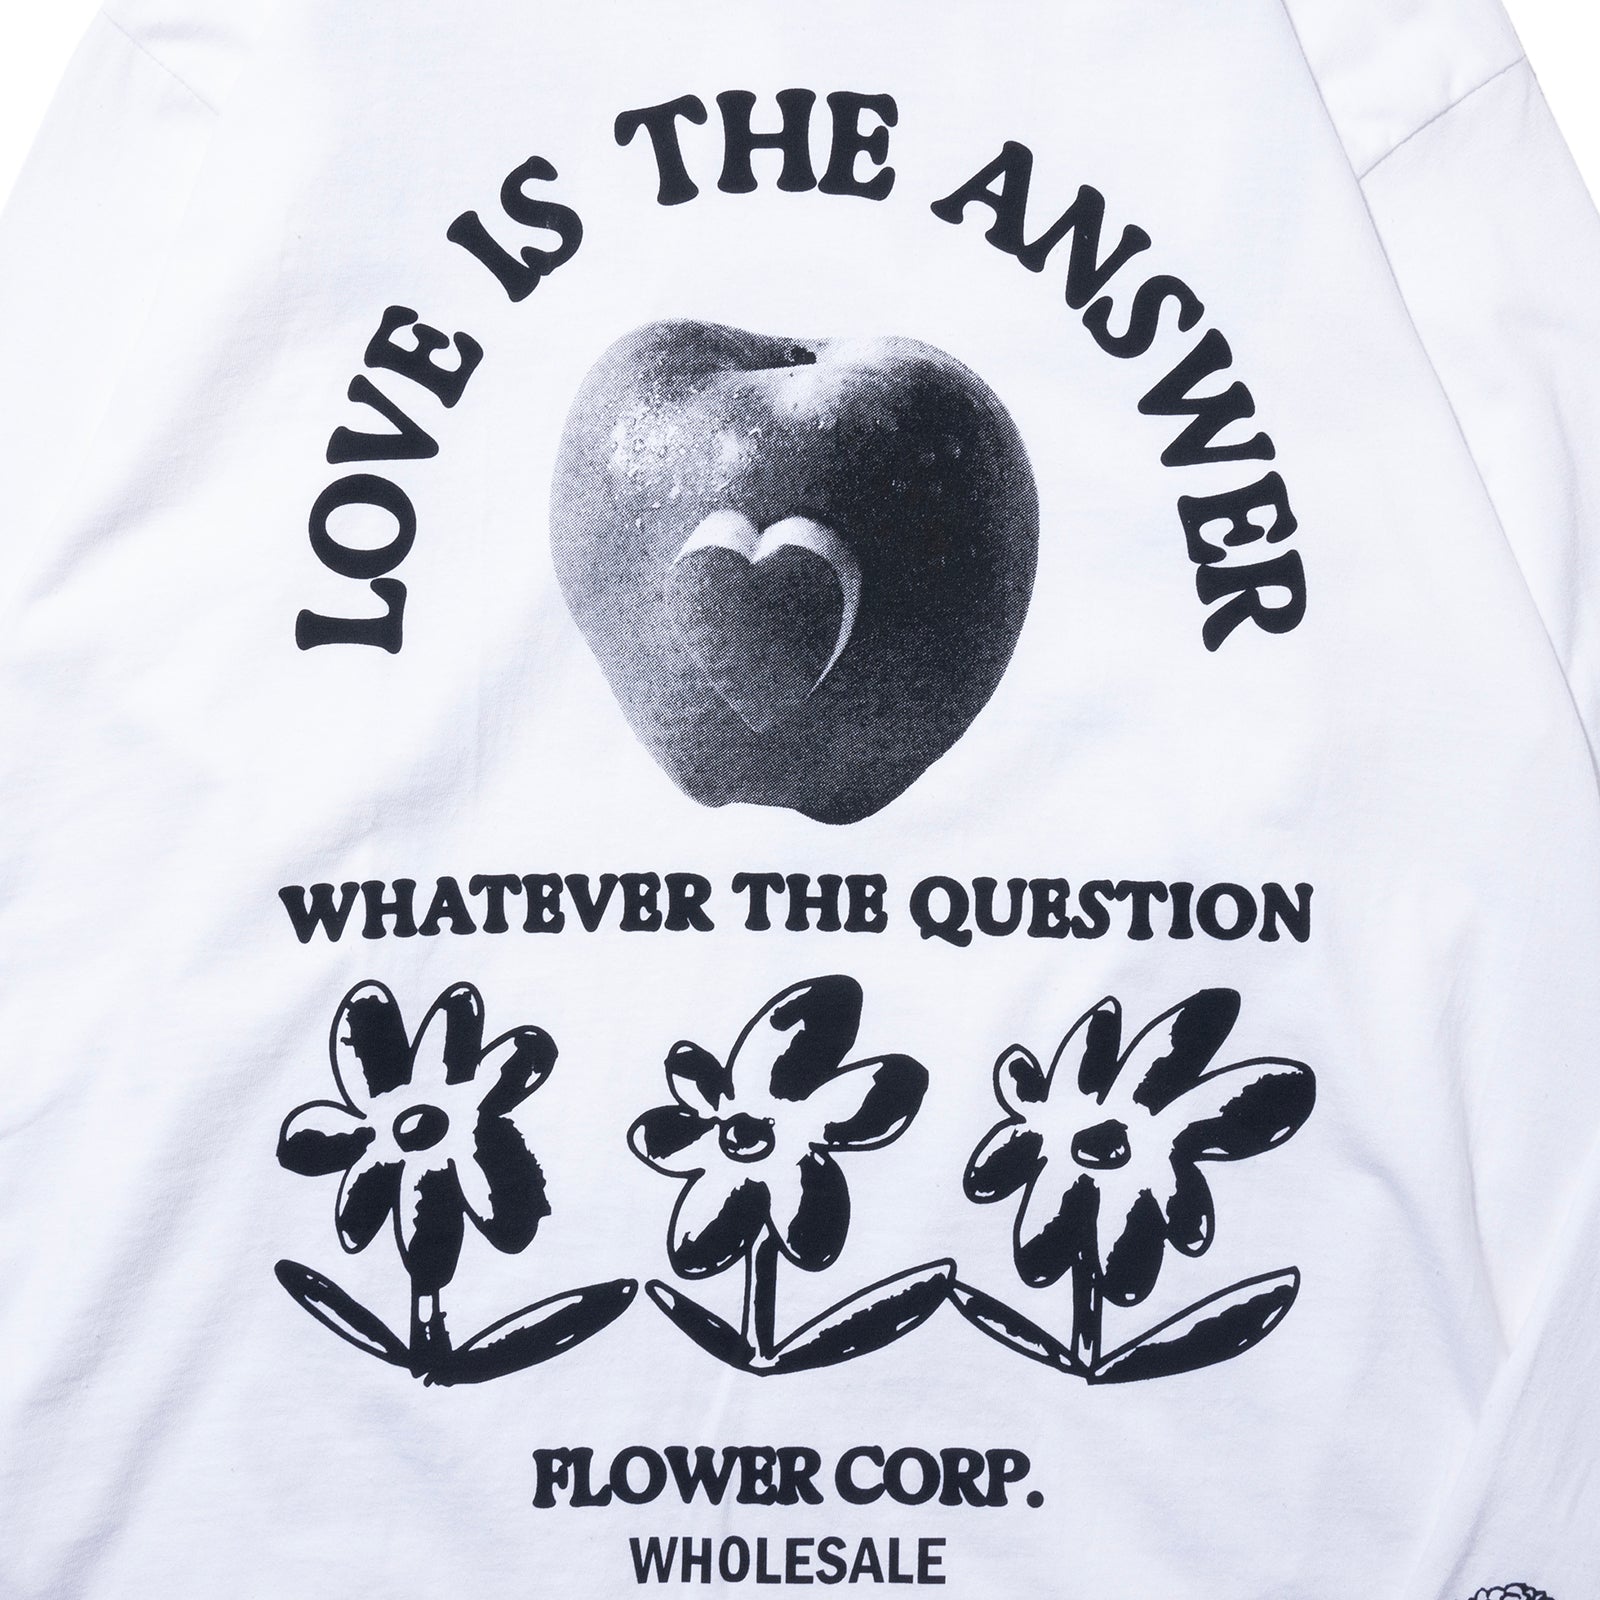 LOVE IS THE ANSWER L/S TEE